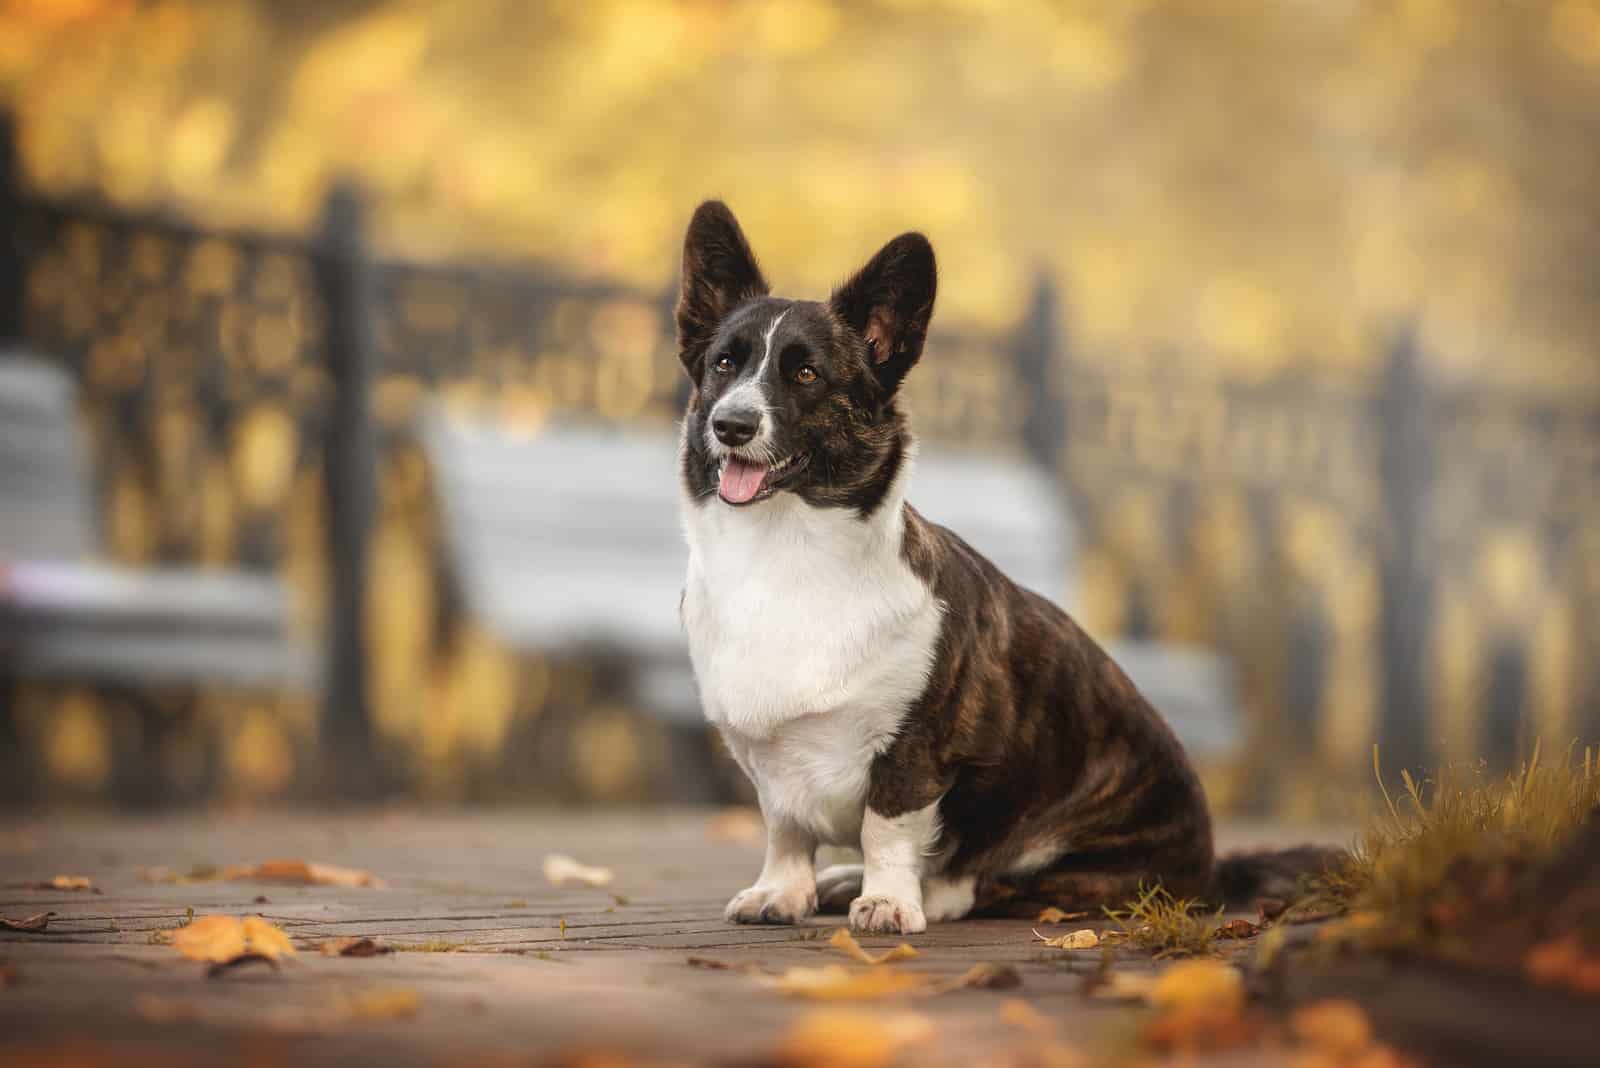 Brindle Corgi: 10+ Facts About These Cute Fluffy Friends